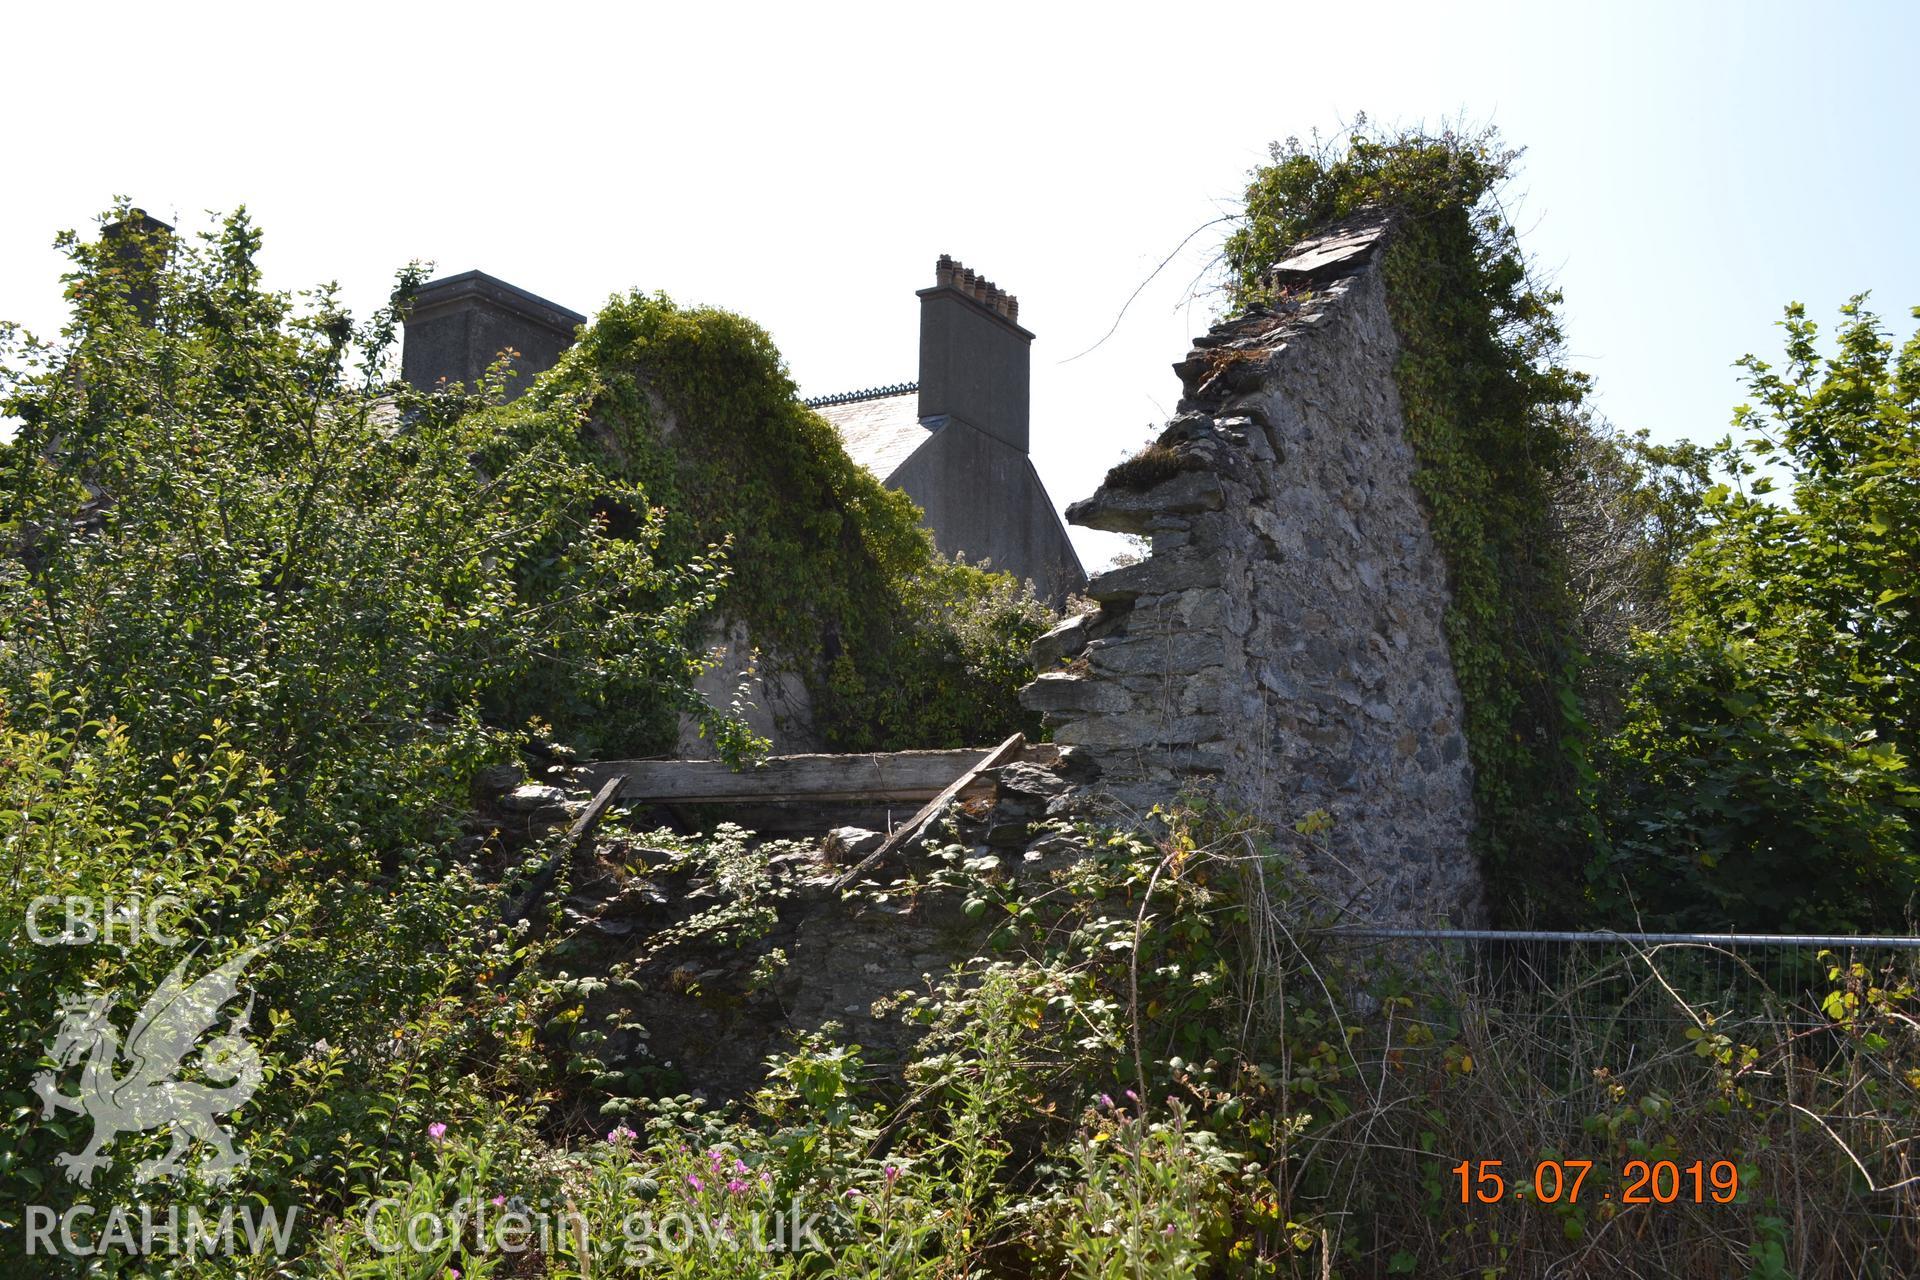 Digital colour photograph showing north-western corner of the old garage at Fron Deg, Caergeiliog, Ynys Mon. Produced by Gerwyn Williams to meet a condition attached to a planning application, 2019.